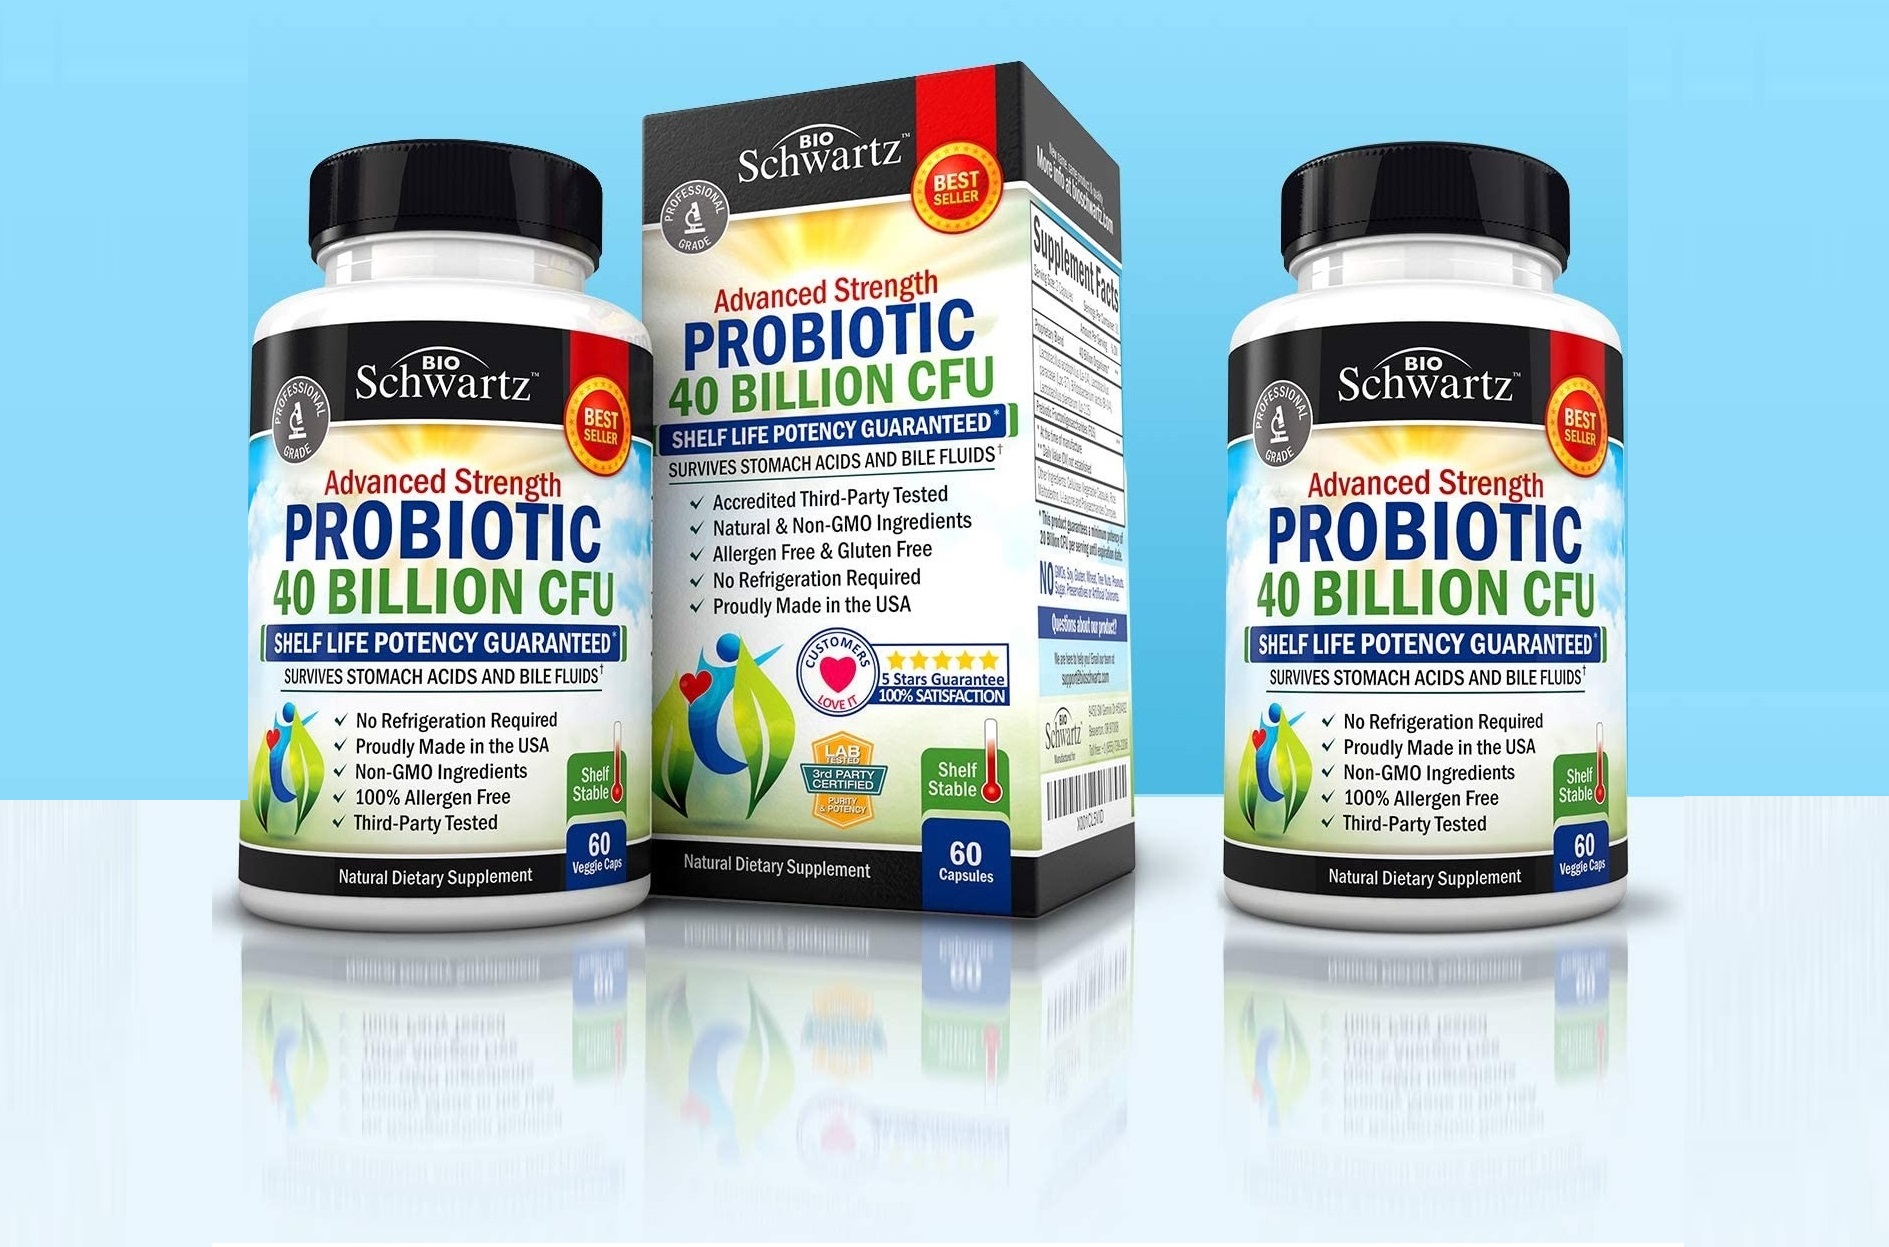 A Review of Bioschwartz Probiotic : Is It good for Health?